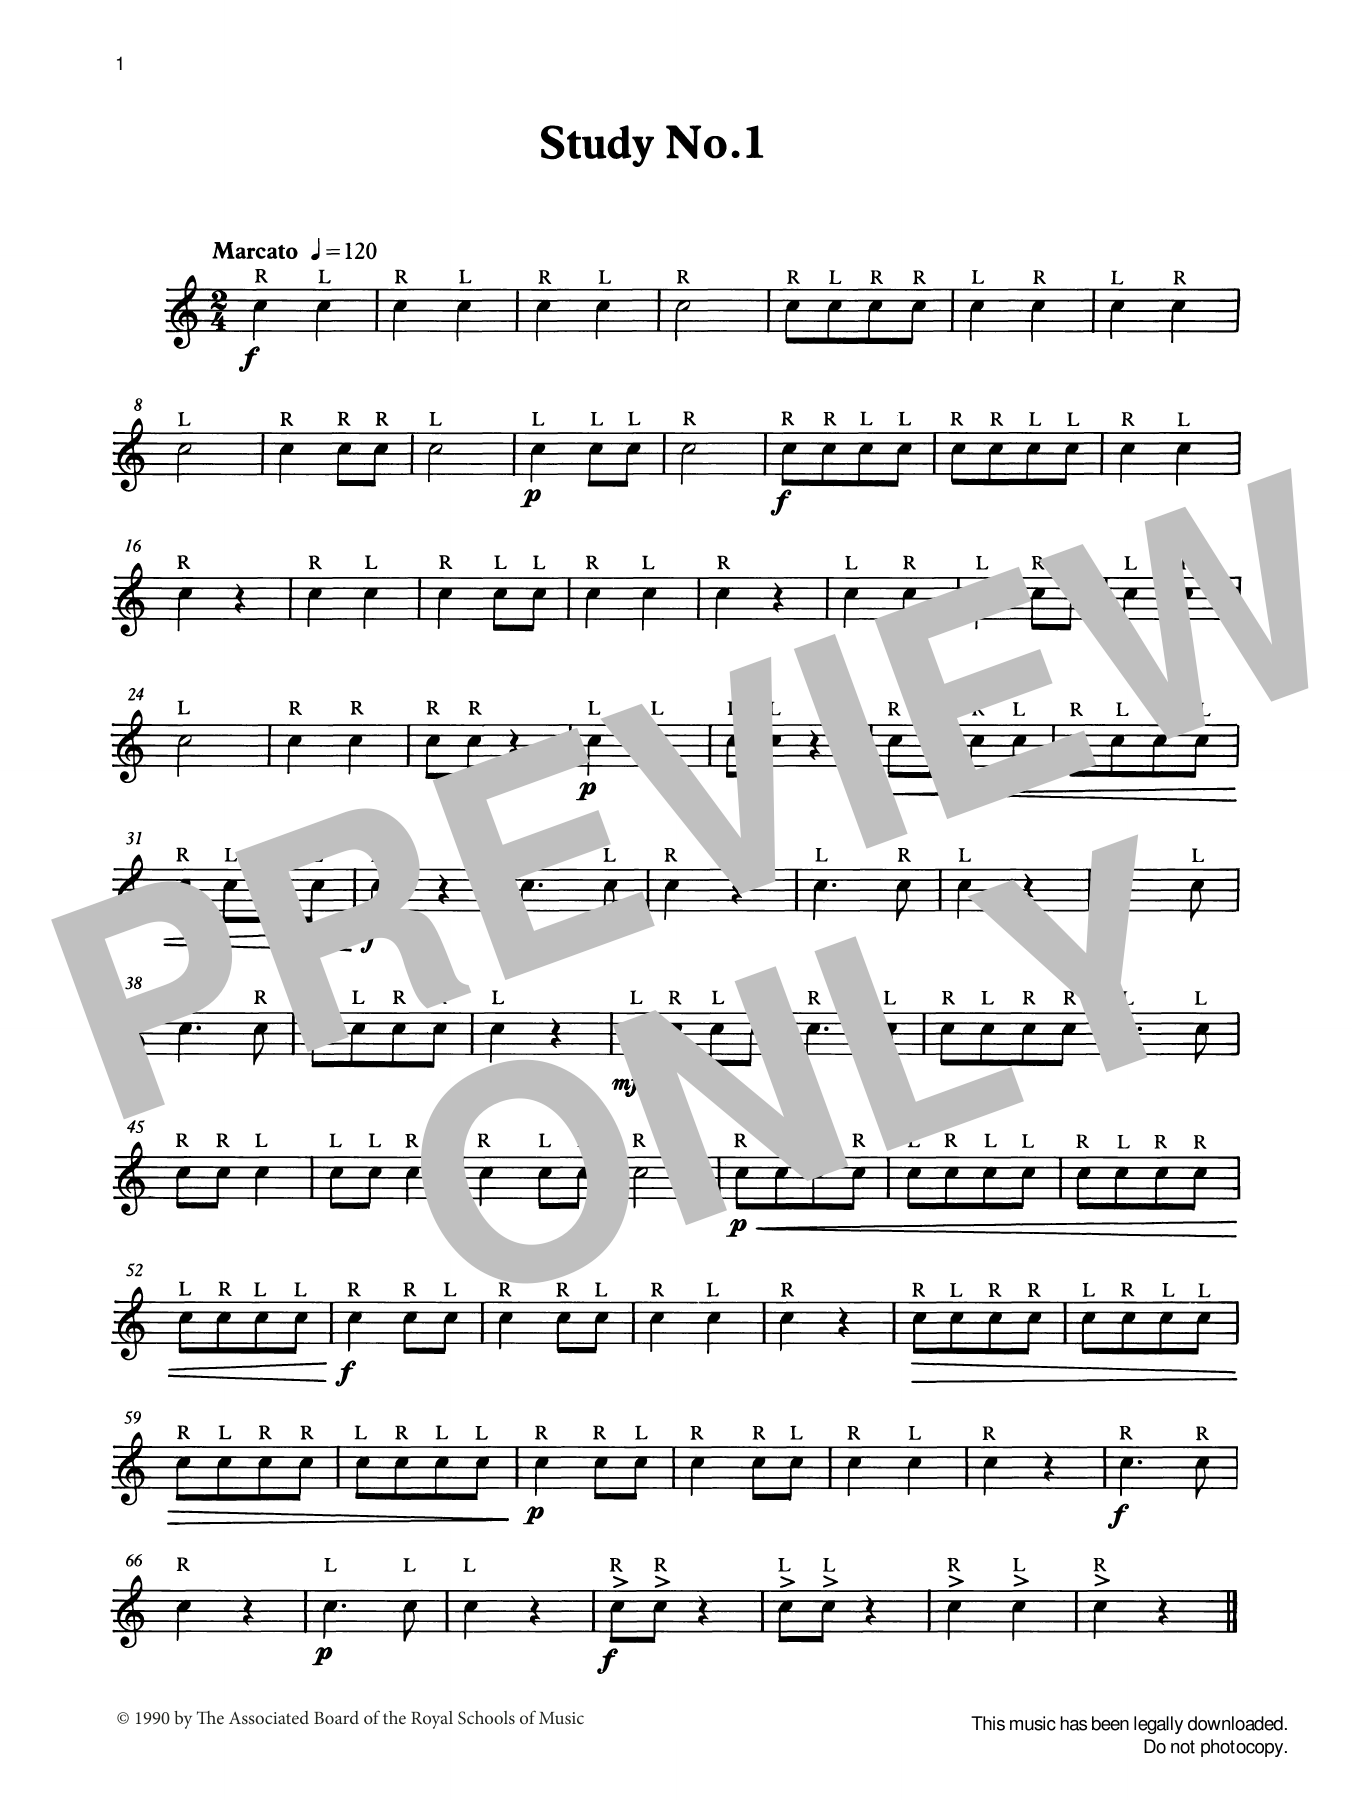 Download Ian Wright and Kevin Hathaway Study No.1 from Graded Music for Snare Sheet Music